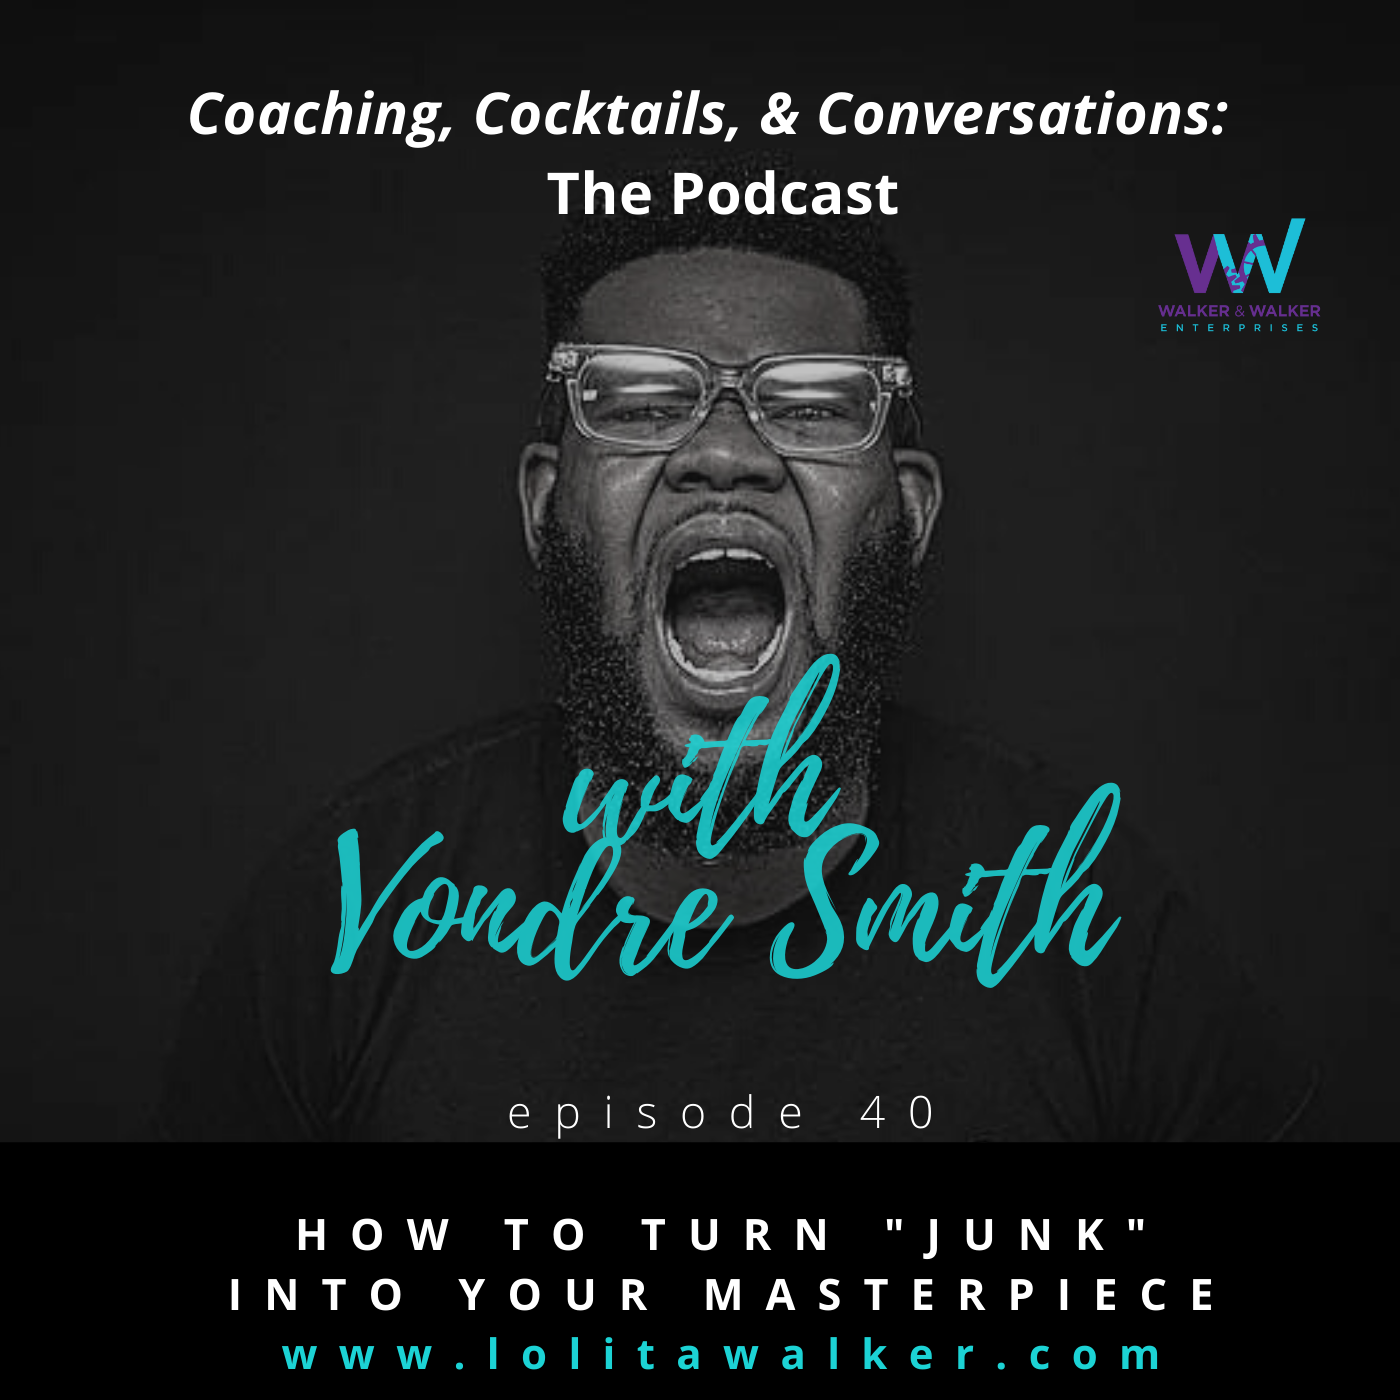 S2E40 - How to Turn Perceived "Junk" into Your Masterpiece (with Vondre Smith)